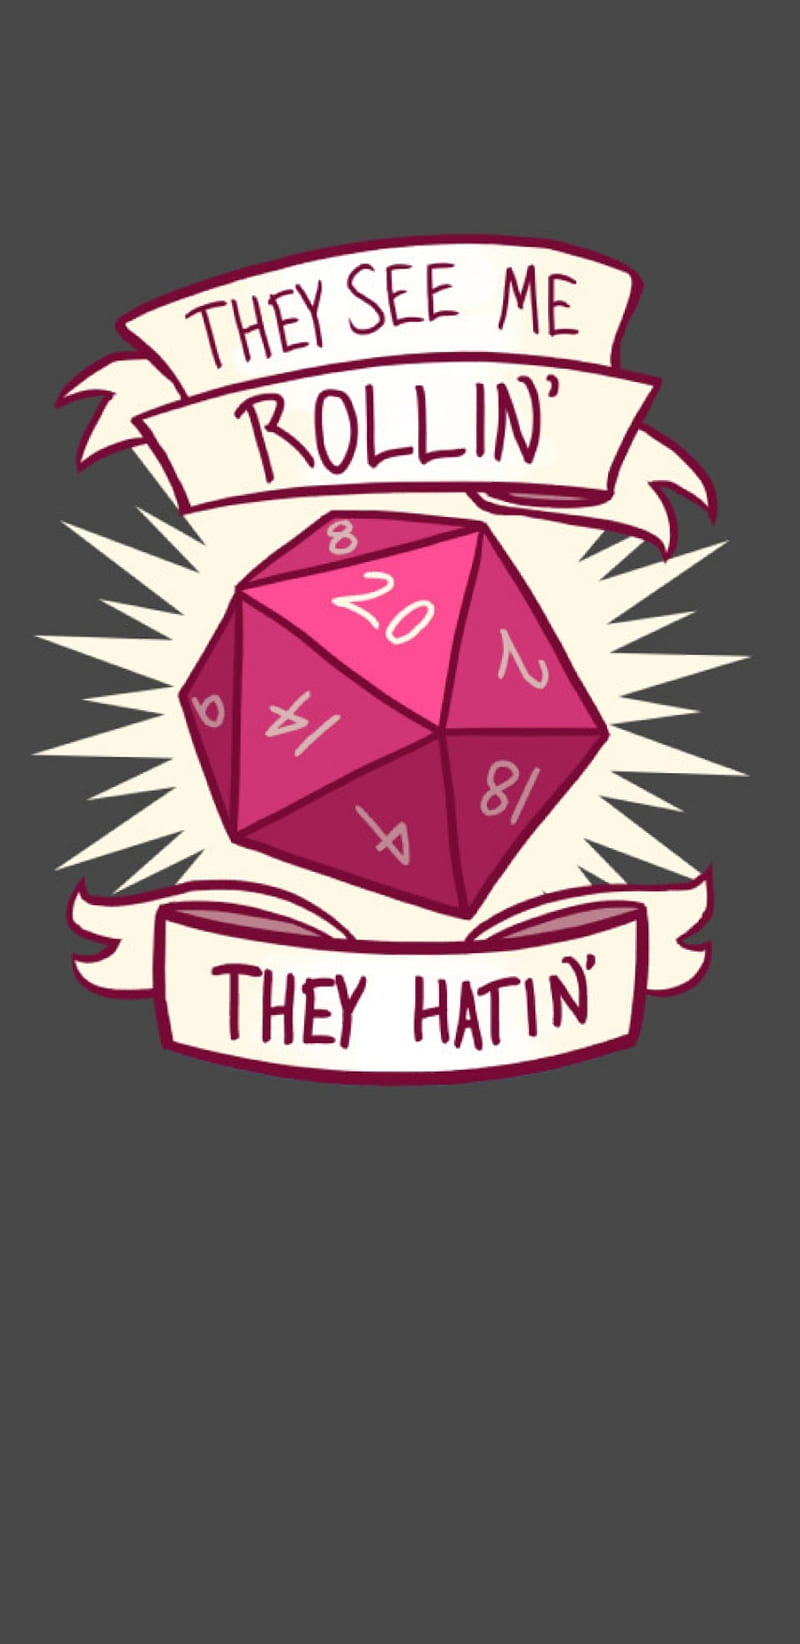 Haters cant crit, critical, dice, dm, dnd, dragons, dungeons, rpg, tabletop, HD phone wallpaper